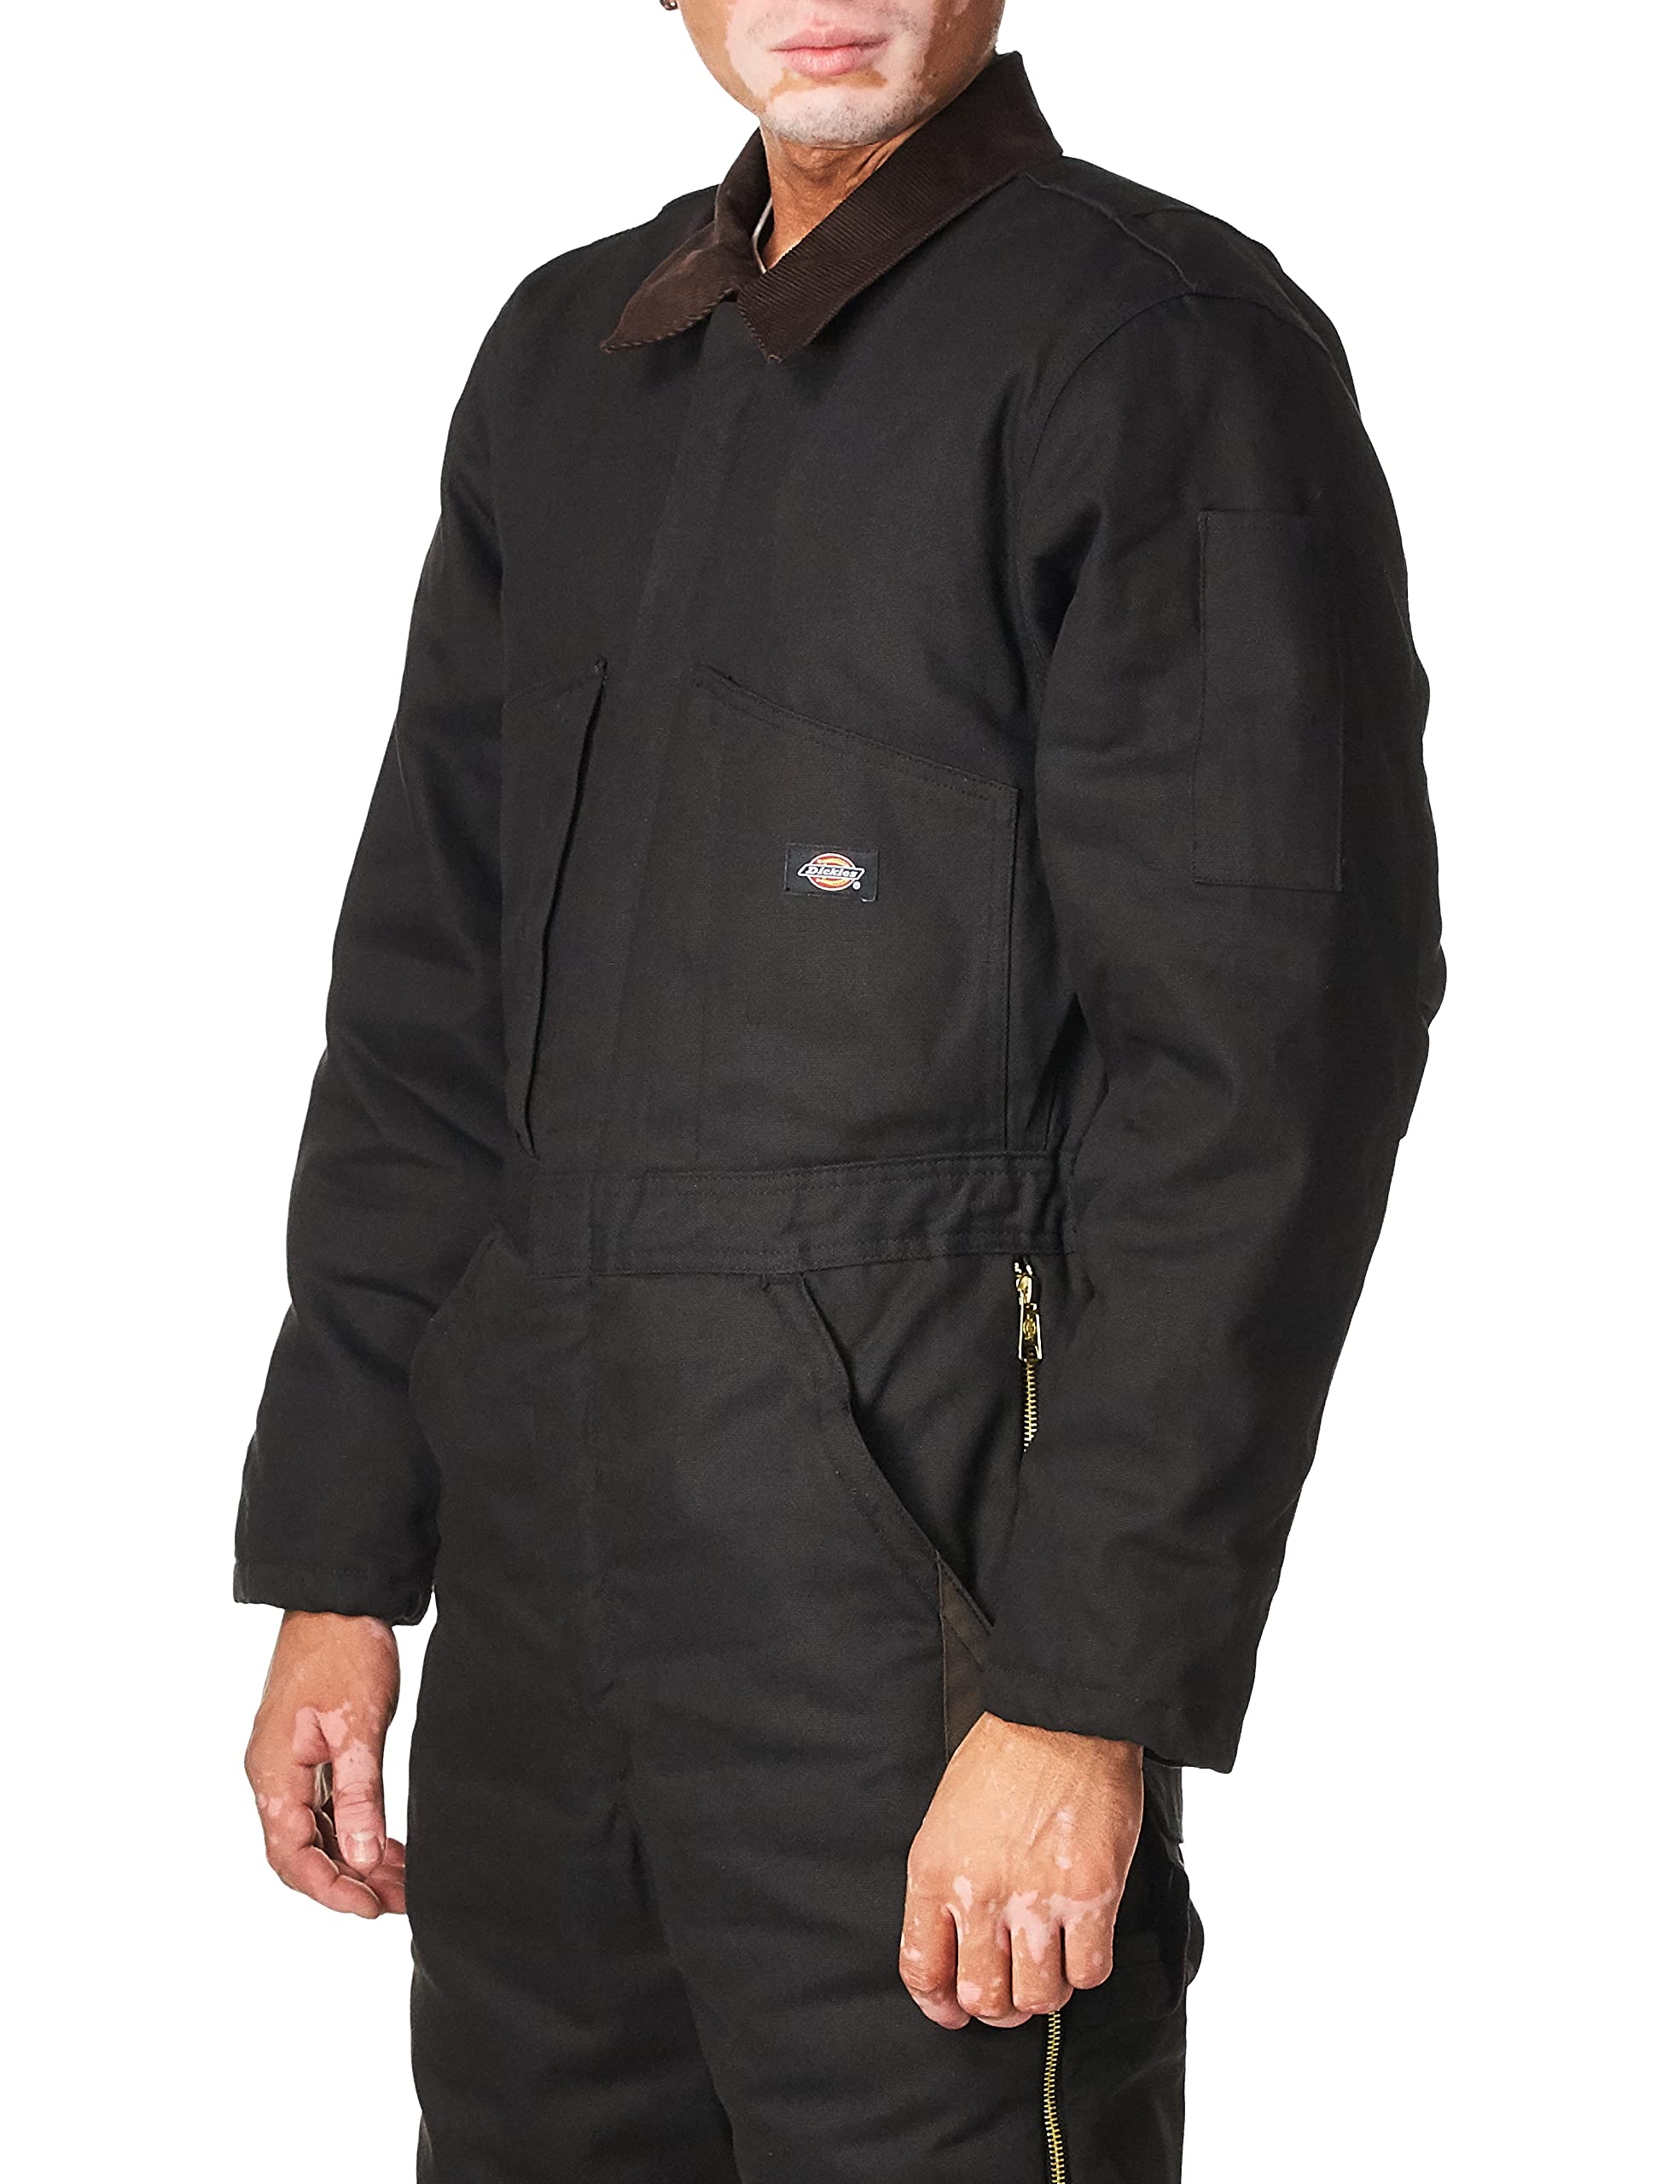 Dickies Men's Premium Insulated Duck Coverall